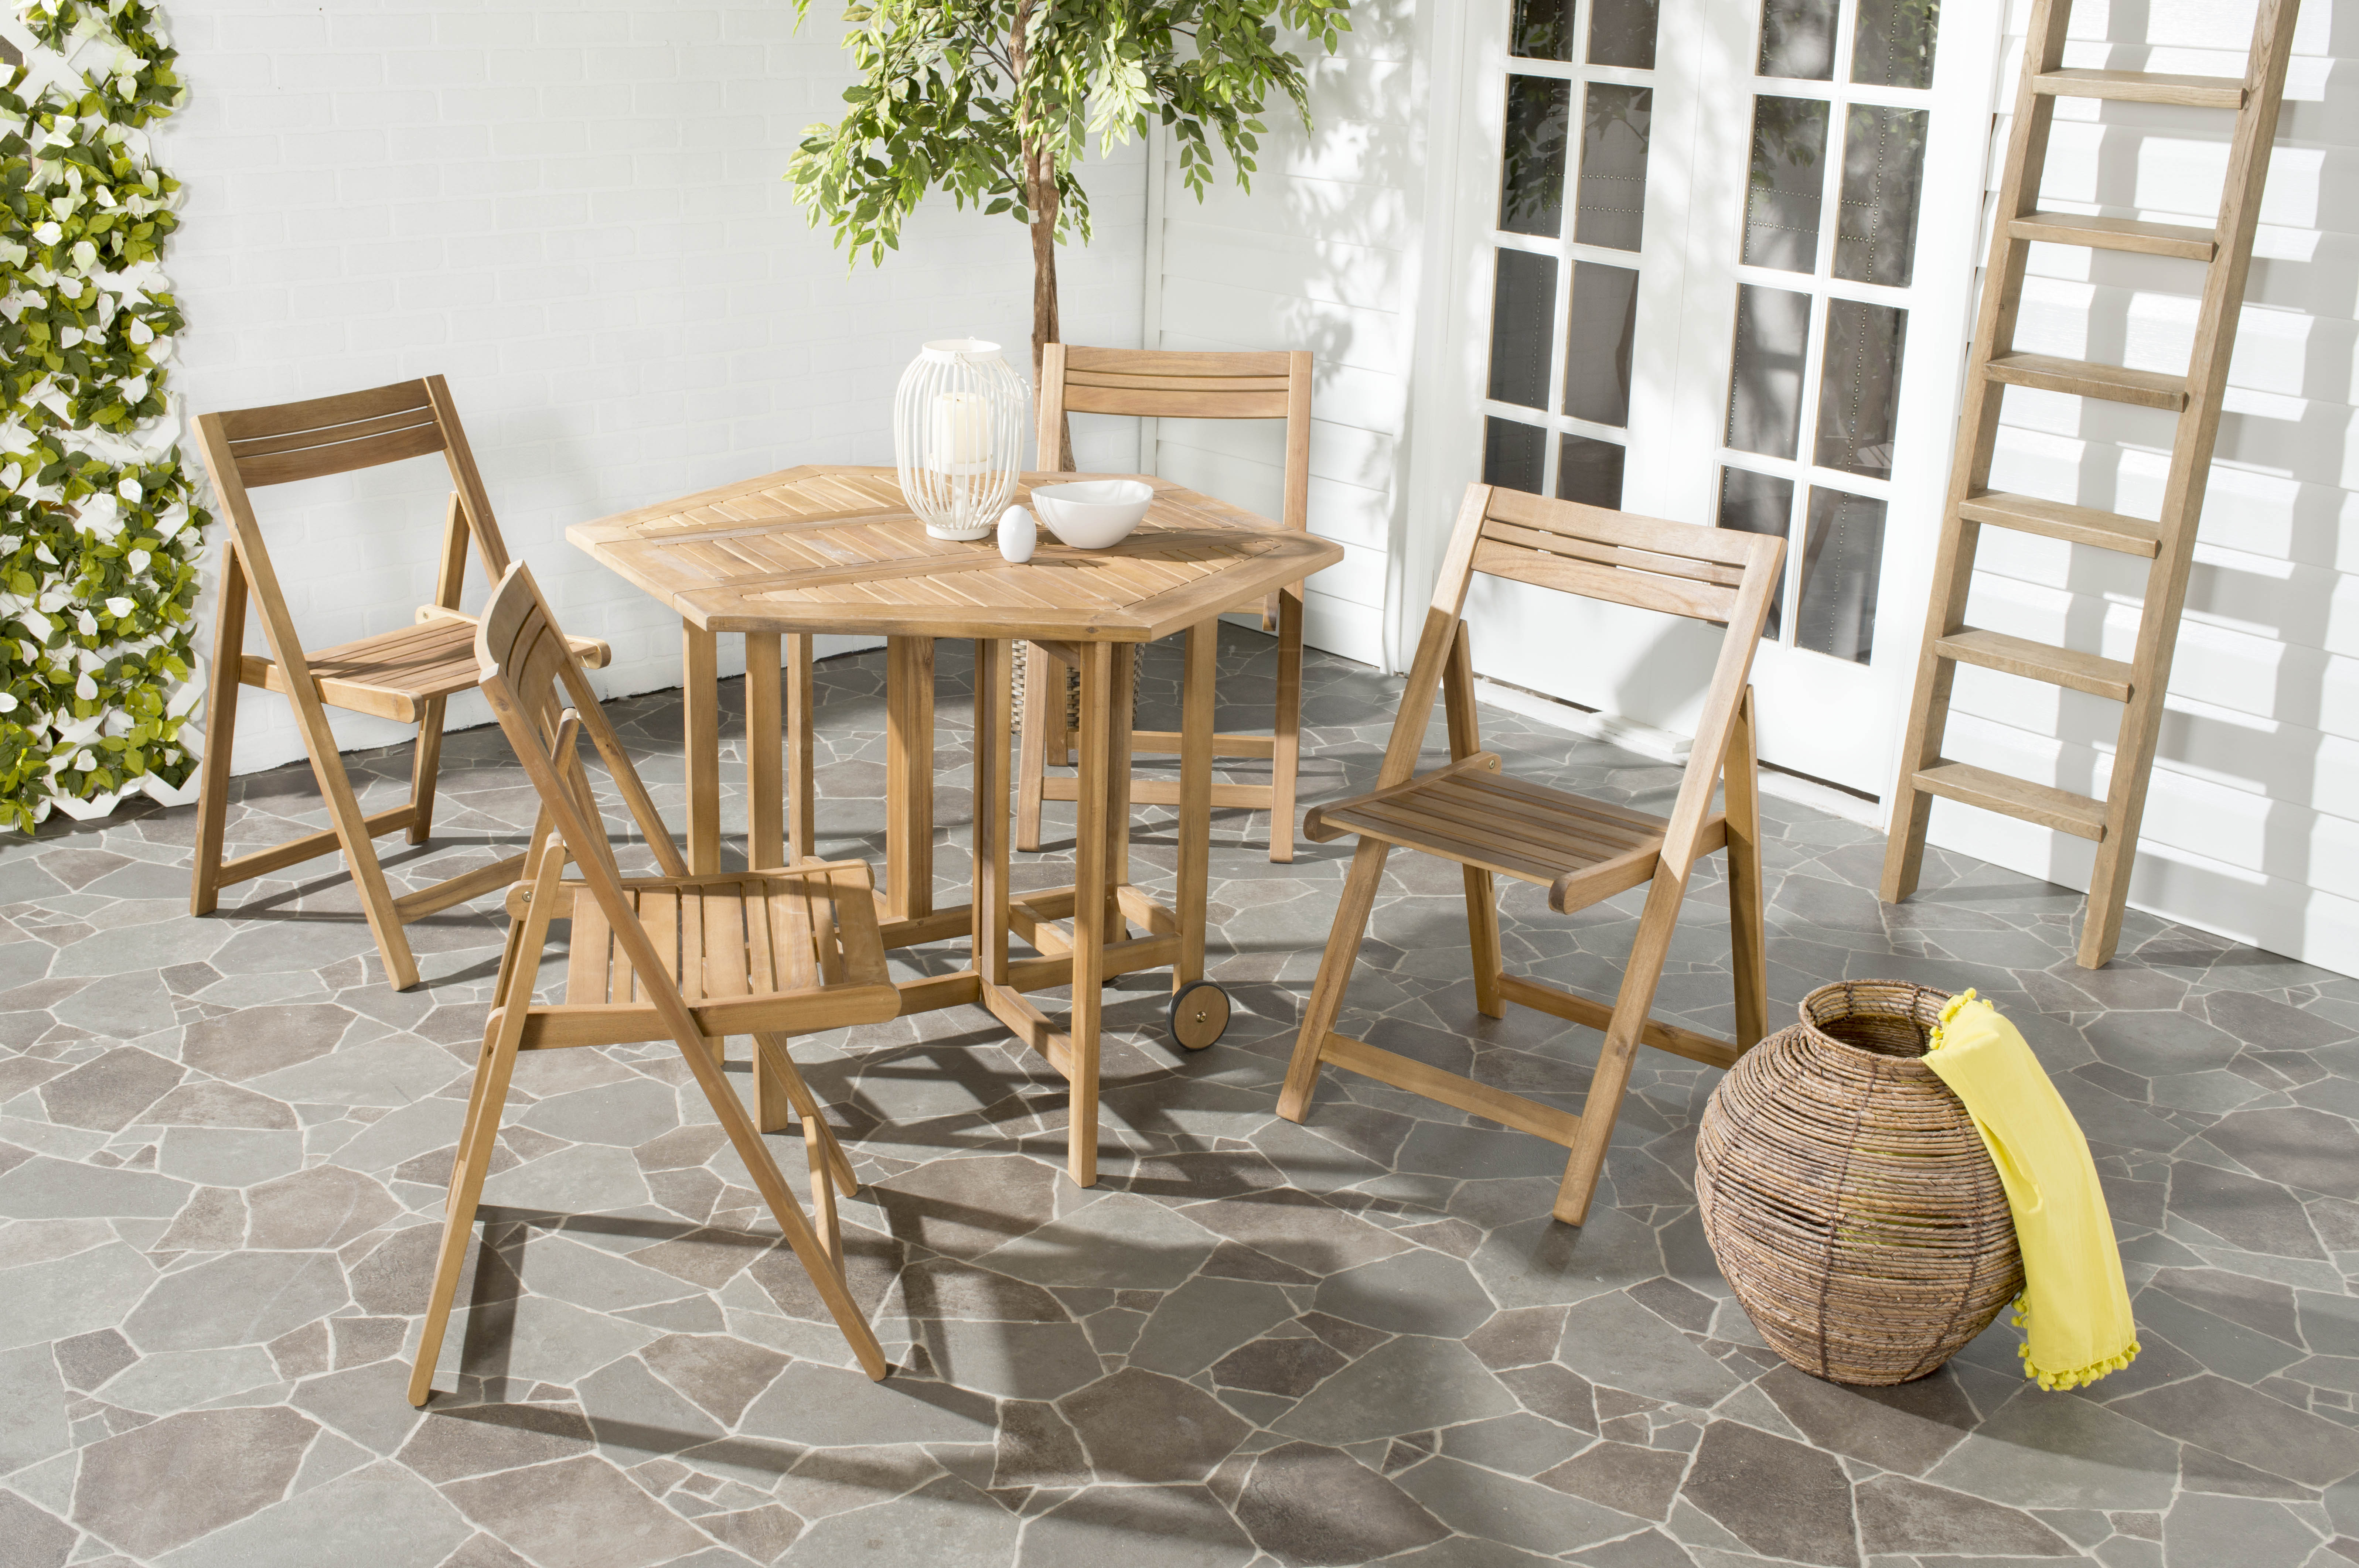 SAFAVIEH Outdoor Collection Kerman Table & 4 Chairs Natural - image 1 of 7